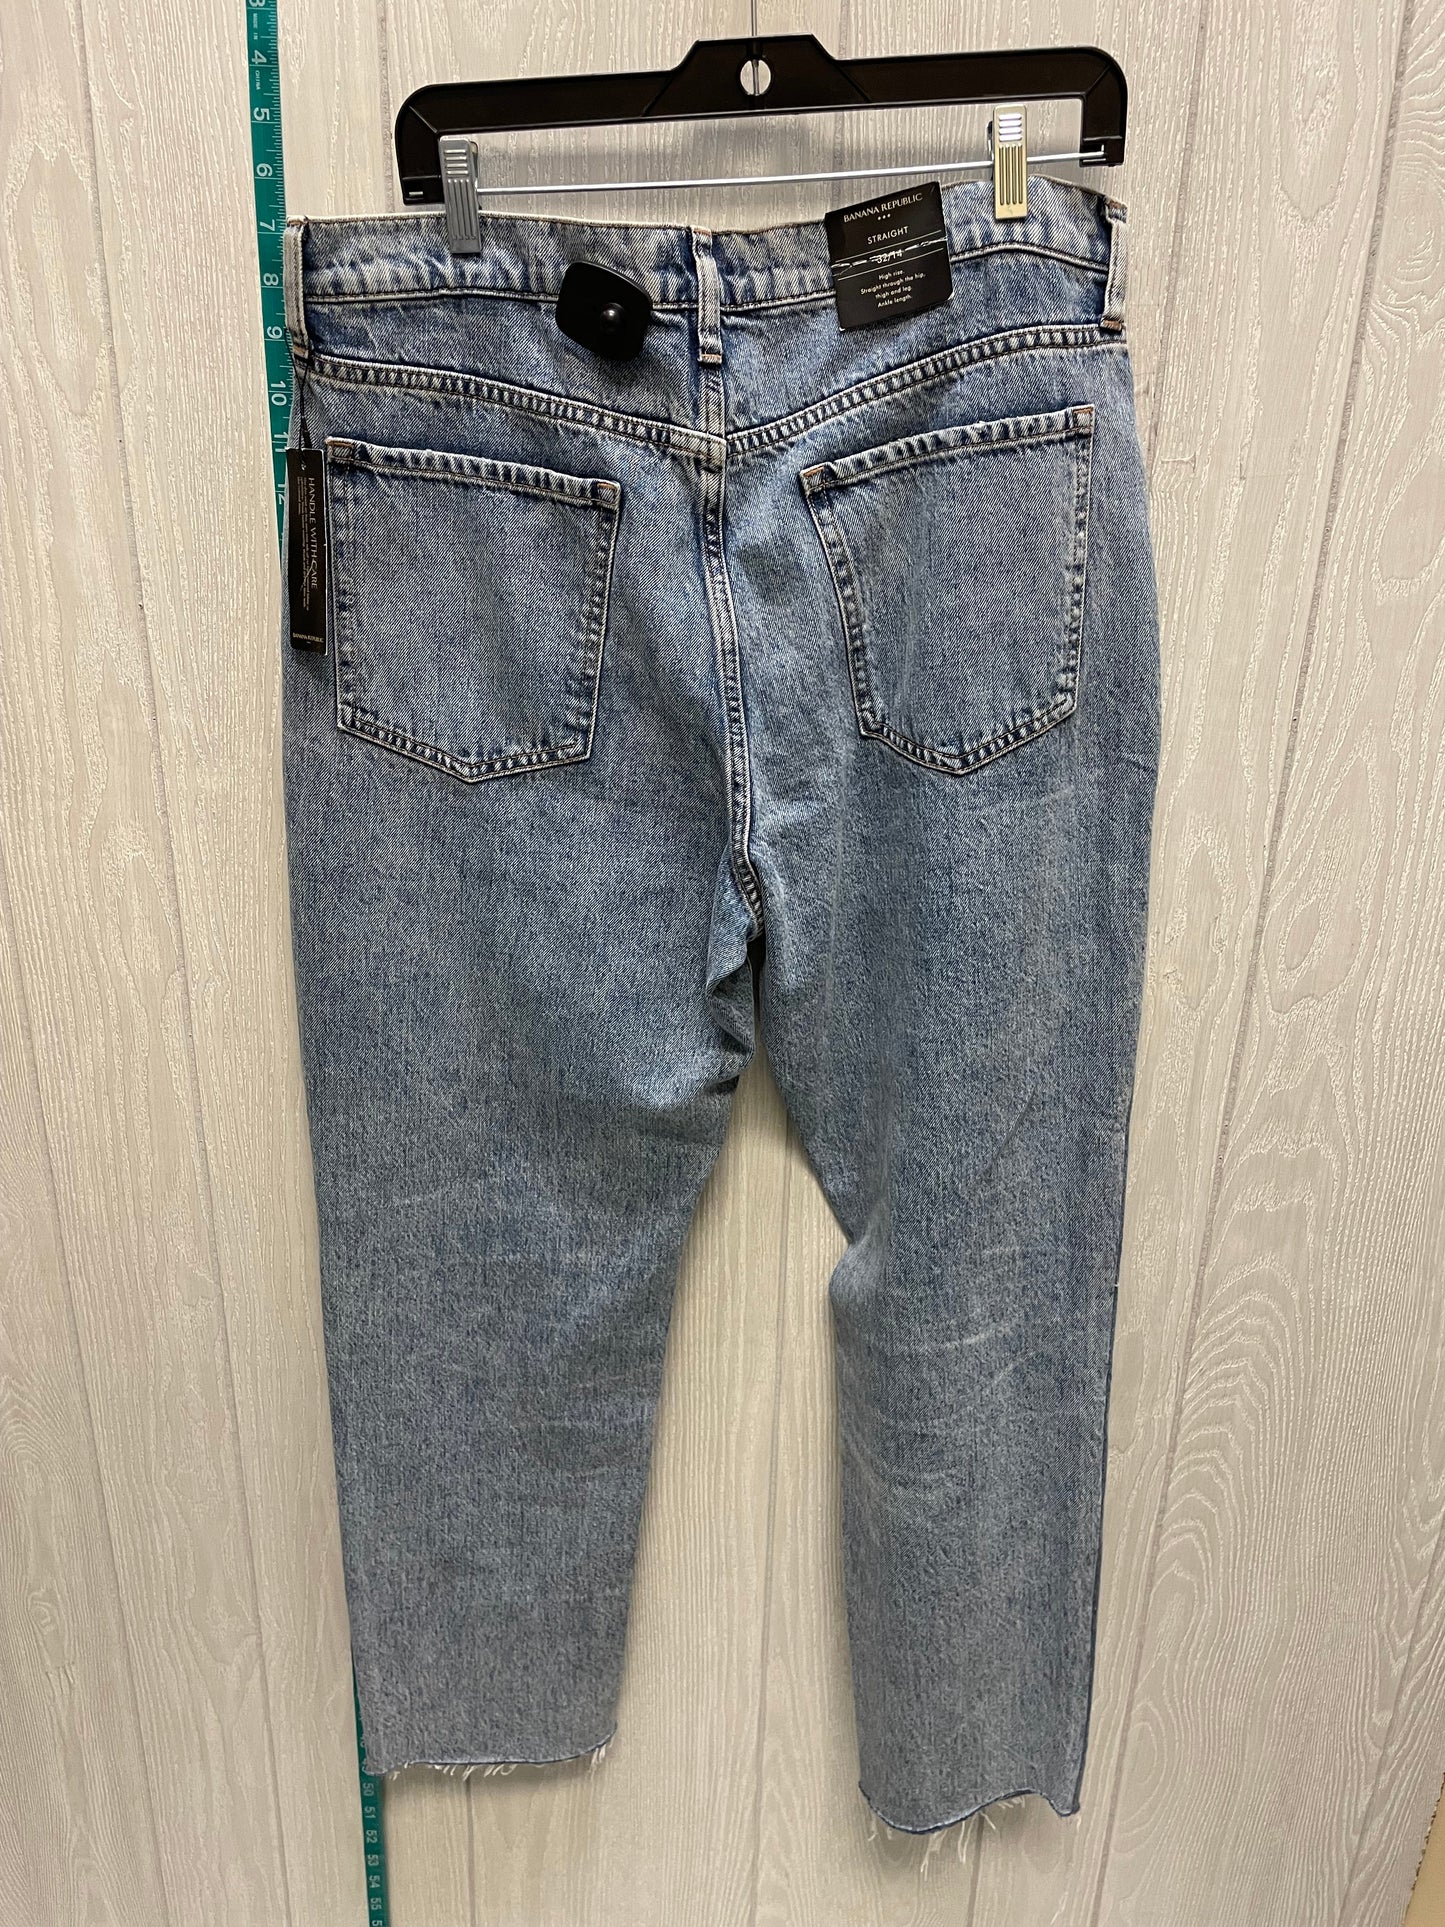 Red Jeans Straight Banana Republic, Size 14